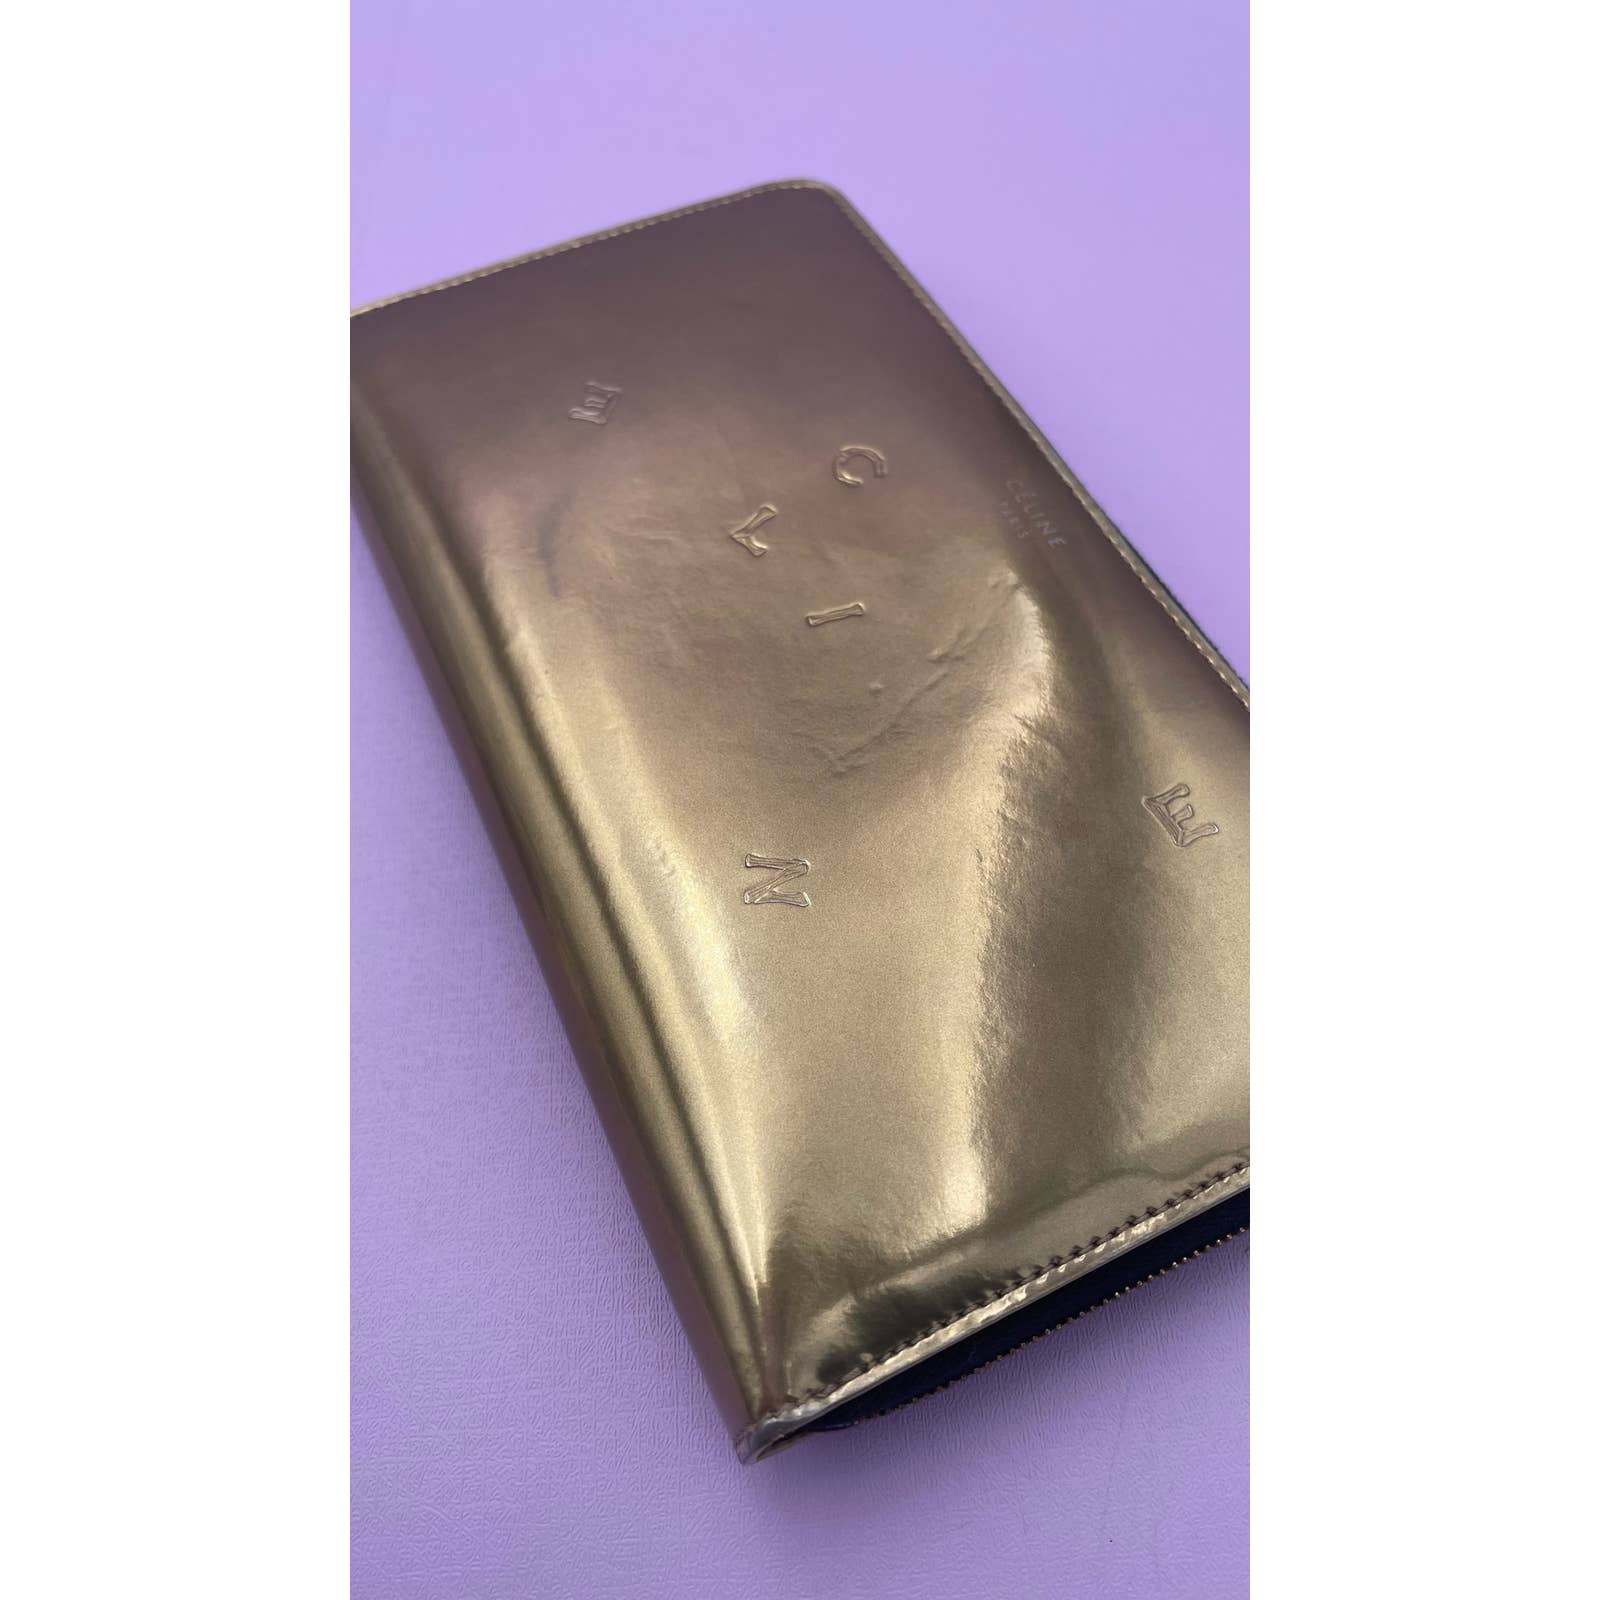 A shiny, gold-colored Celine Alphabet Wallet Gold in patent leather with a zipper closure rests on a purple background. The wallet features embossed letters and symbols on its surface.